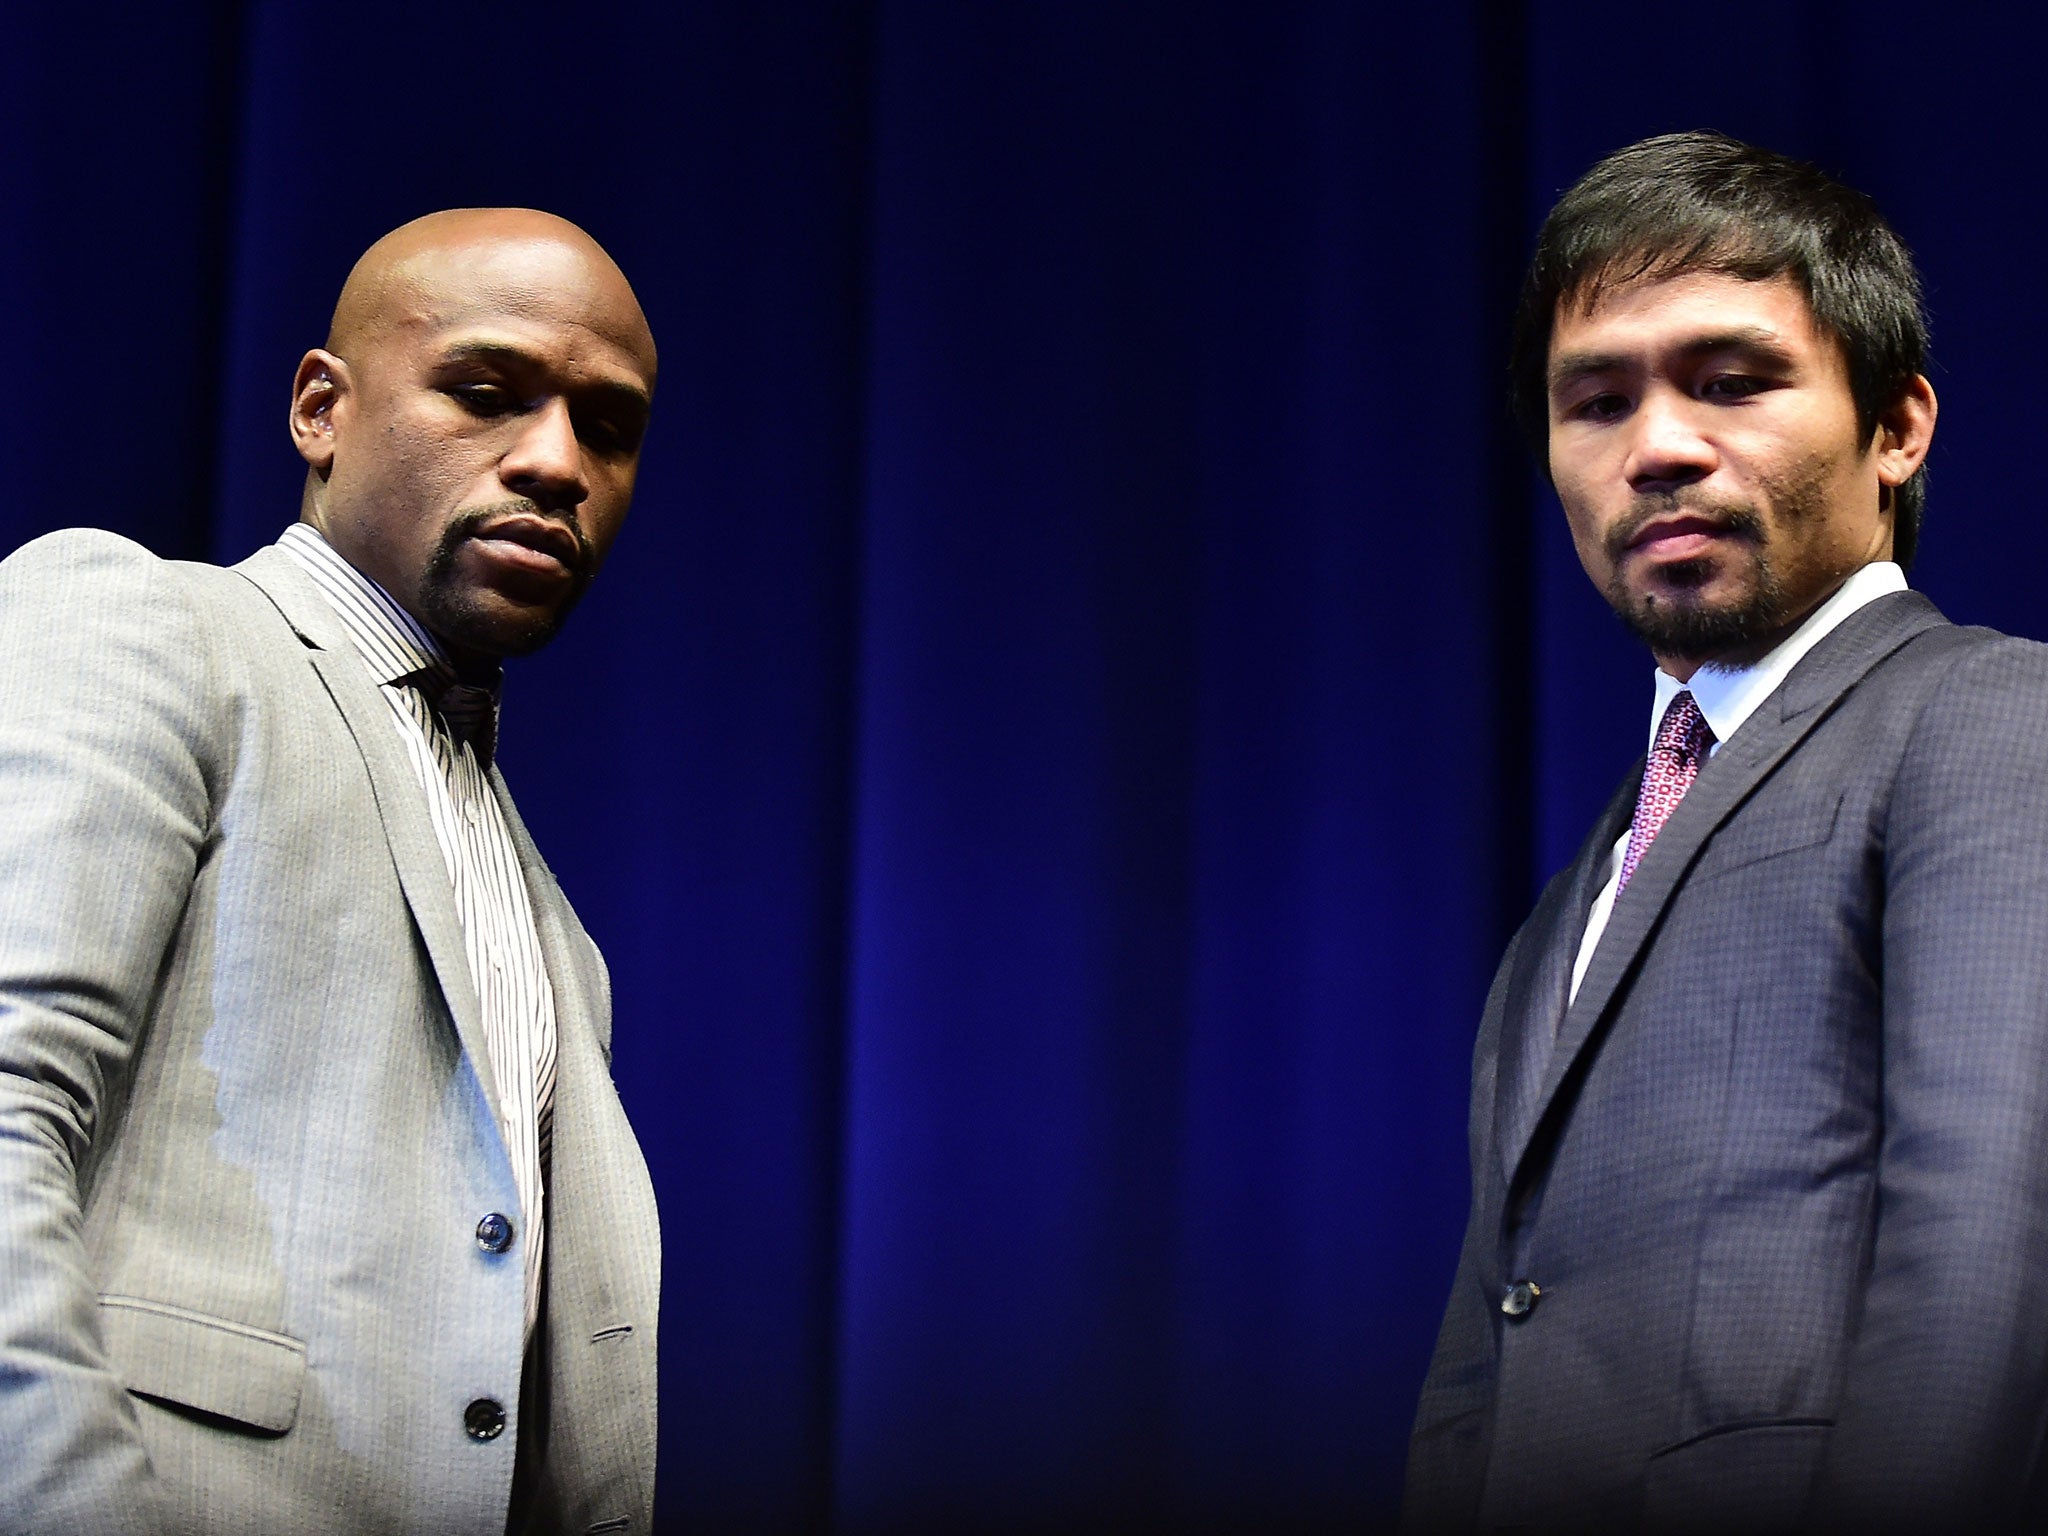 Floyd Mayweather faces Manny Pacquiao on 2 May